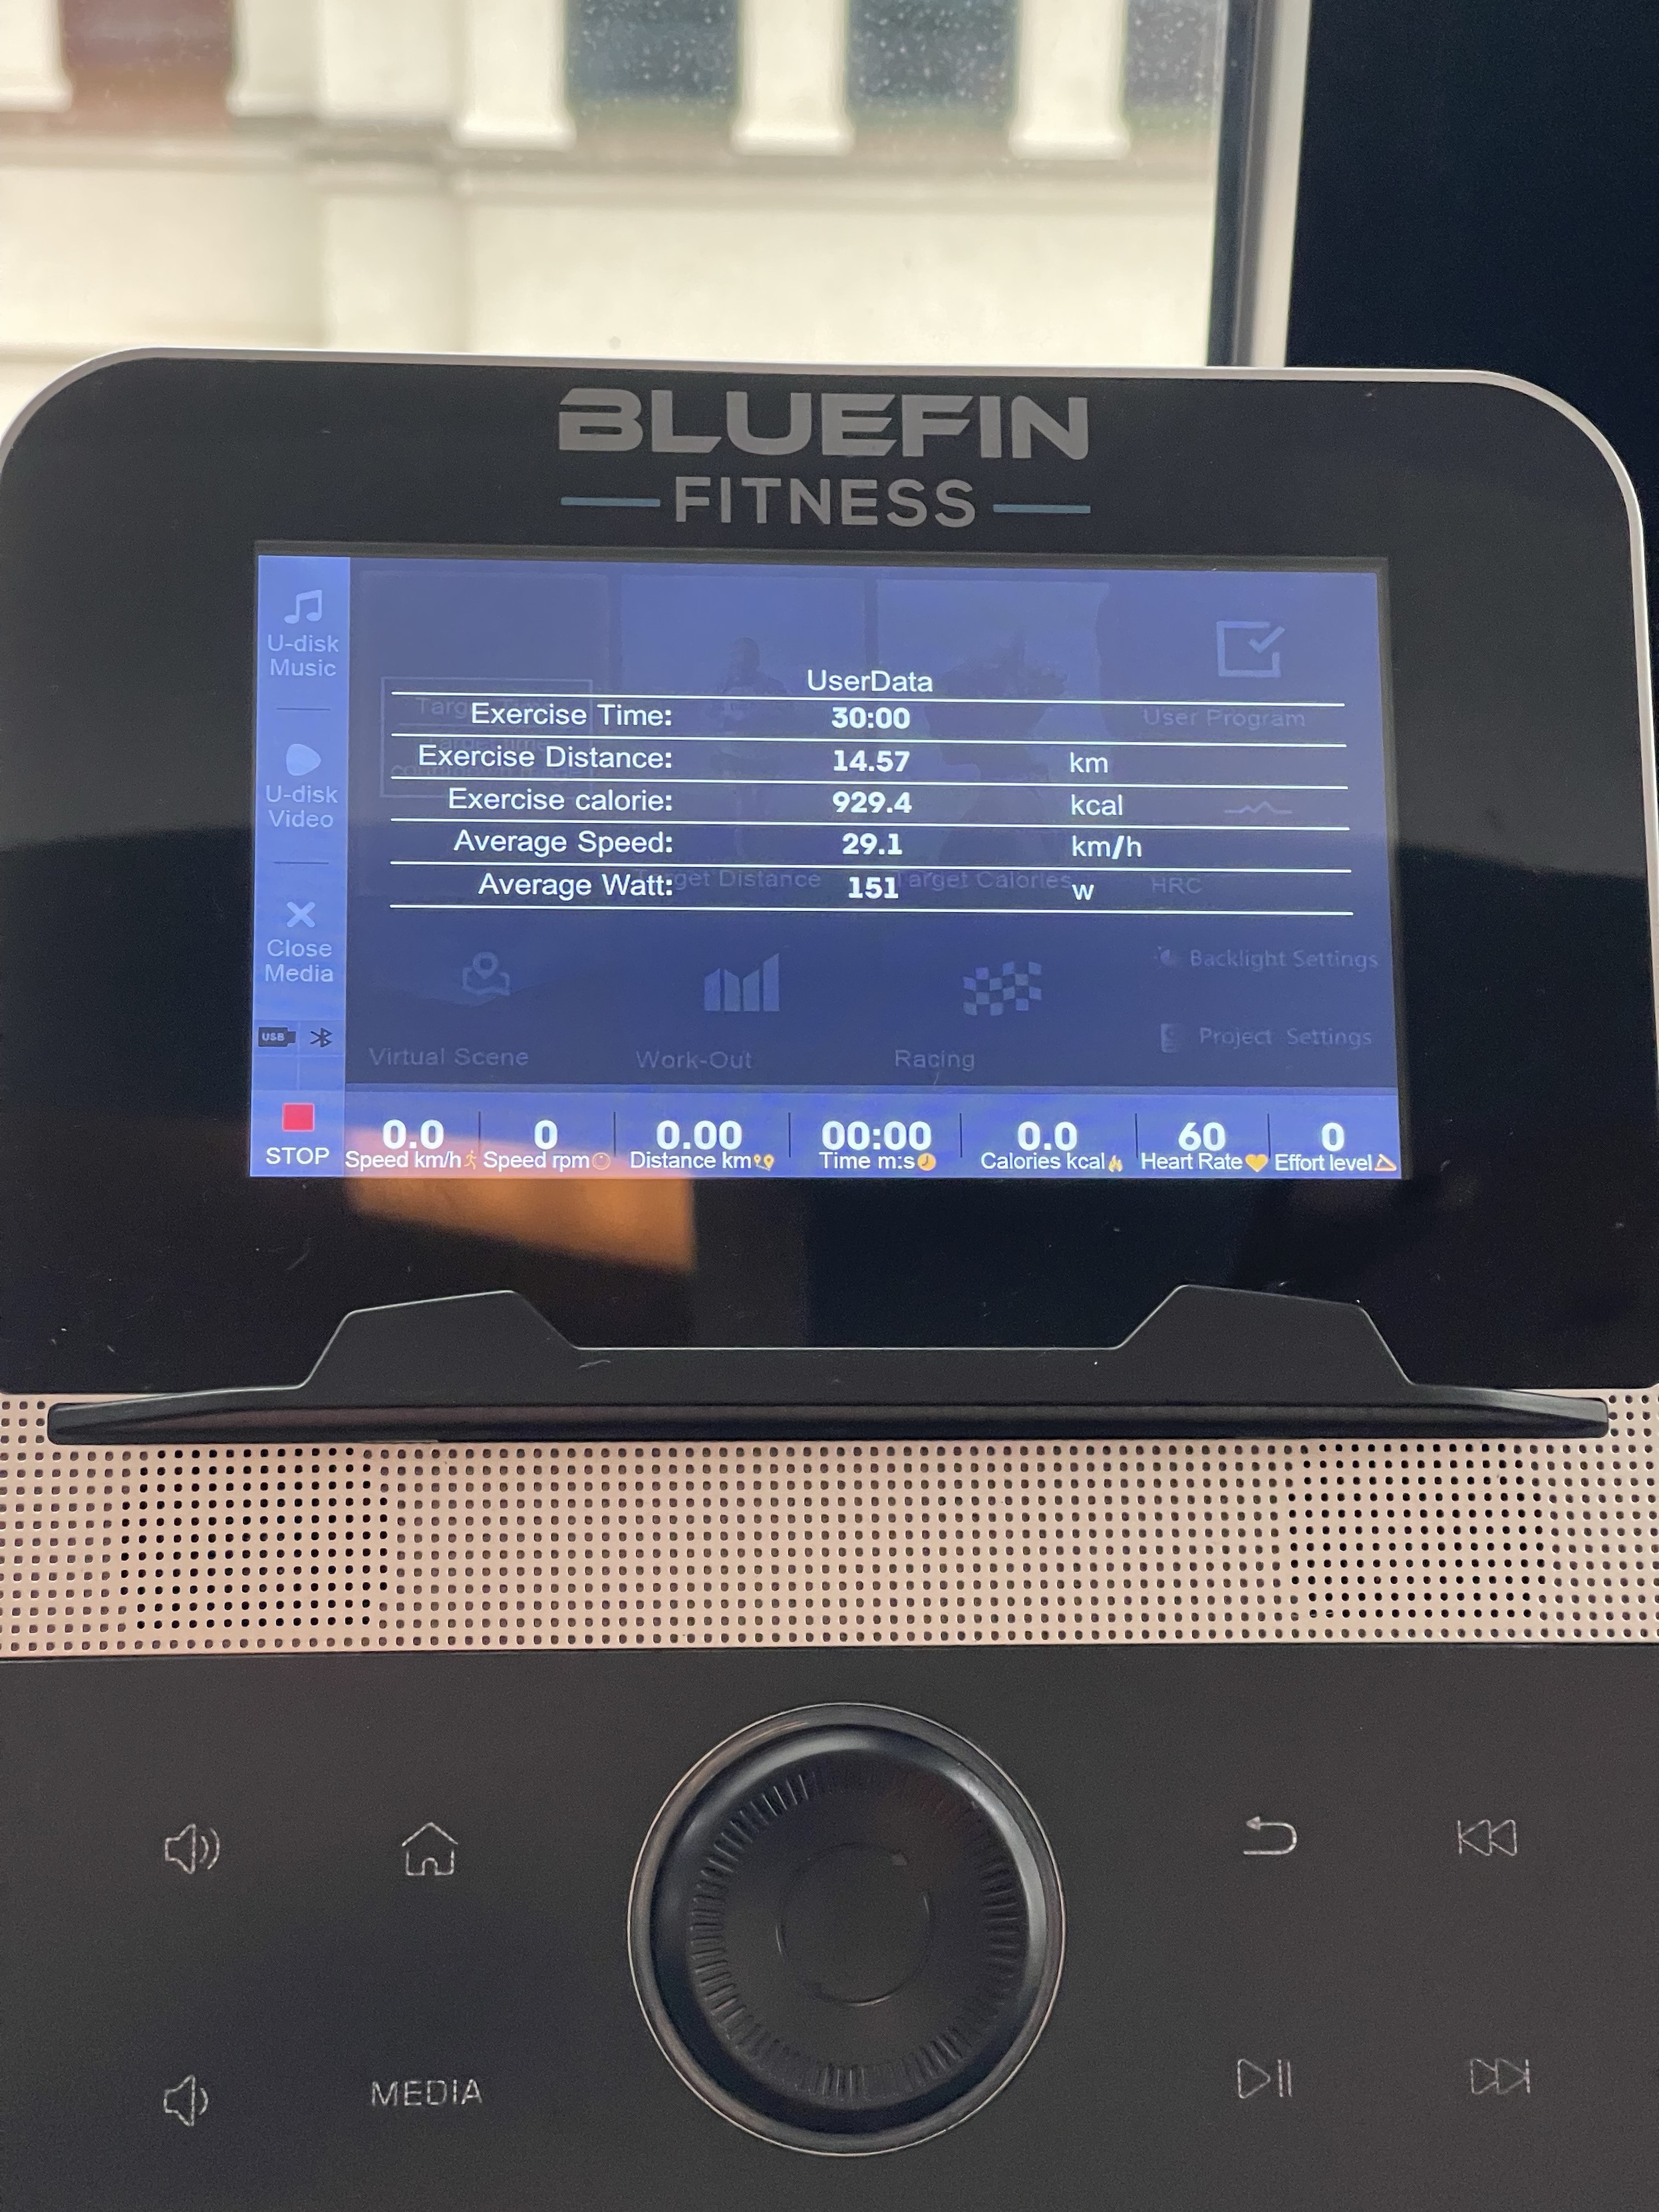 A display screen of a Bluefin Fitness exercise machine showing workout data, including time (30 min), distance 14.57 km), calories (929.4 kcal), average speed (29.1 km/h), and wattage (151 W).